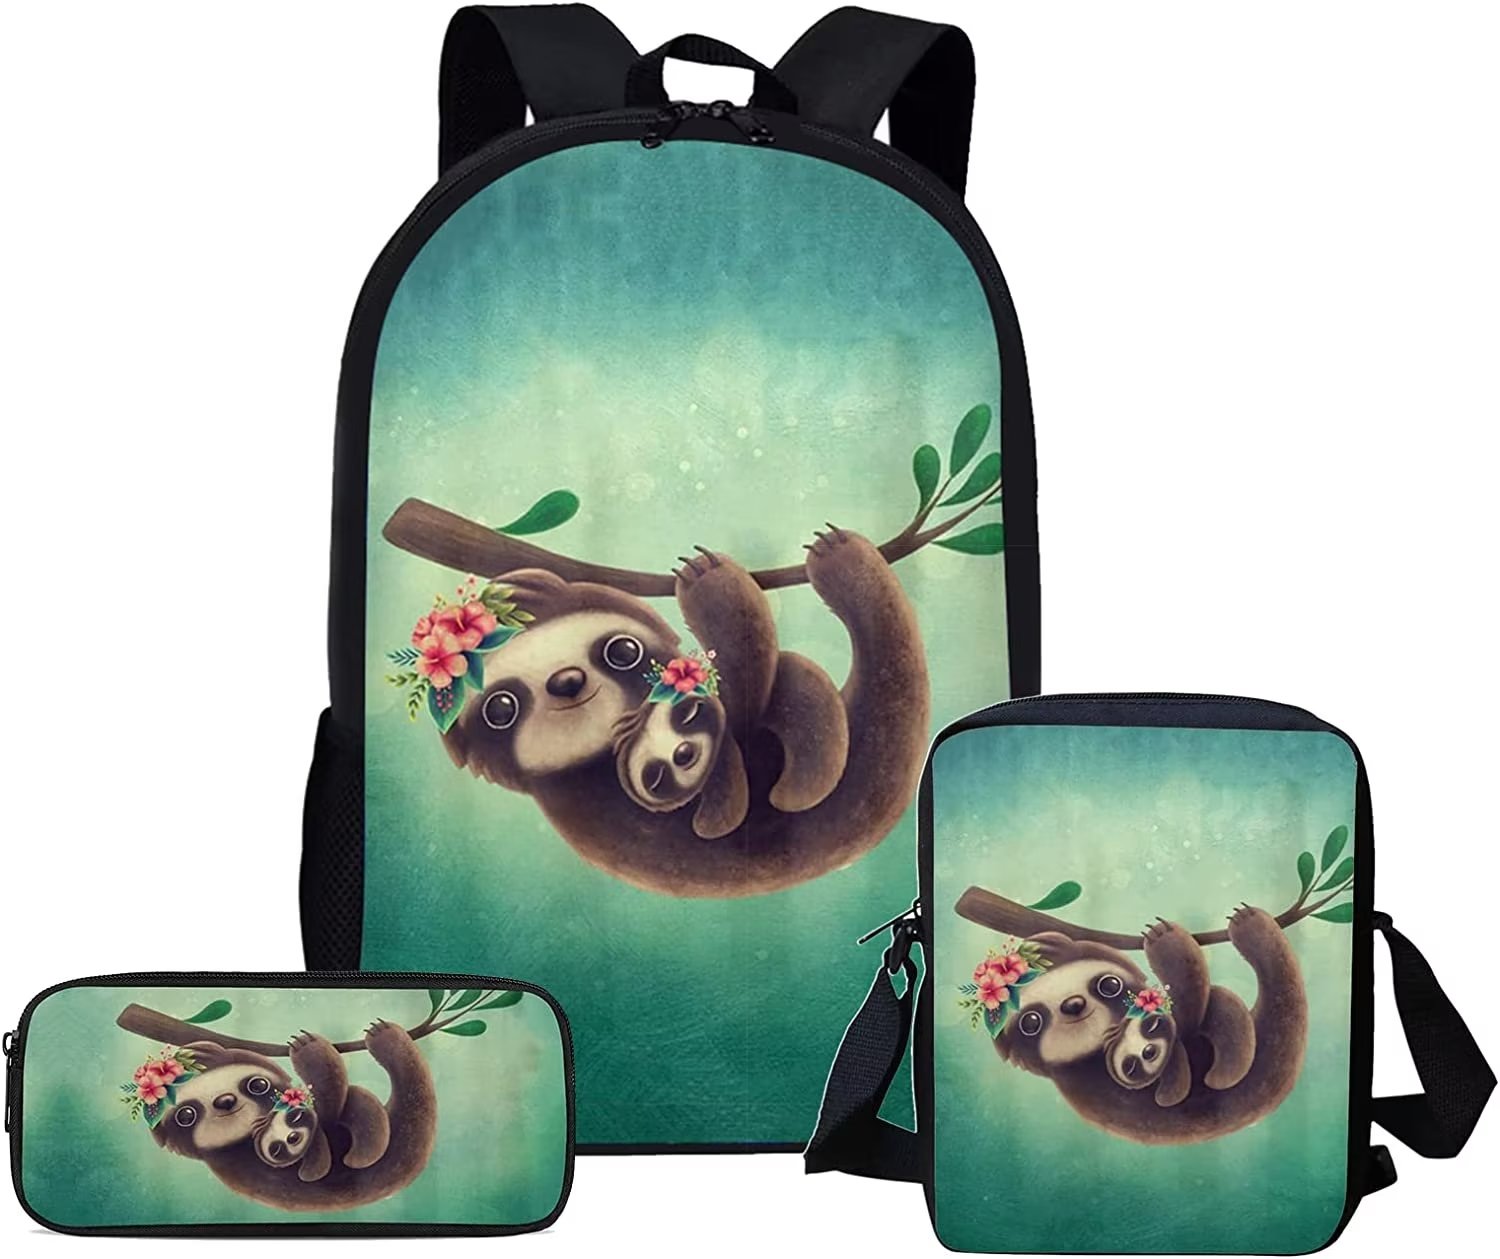 Renewold Sloth Cherry Blossoms Kids Backpack with Crossbody Bag for Girls  Cute School Bag Kindergarten/Primary School Bookbag Satchel Pencil Case  Child Bagpack for Travel Hiking Camping Daypack 